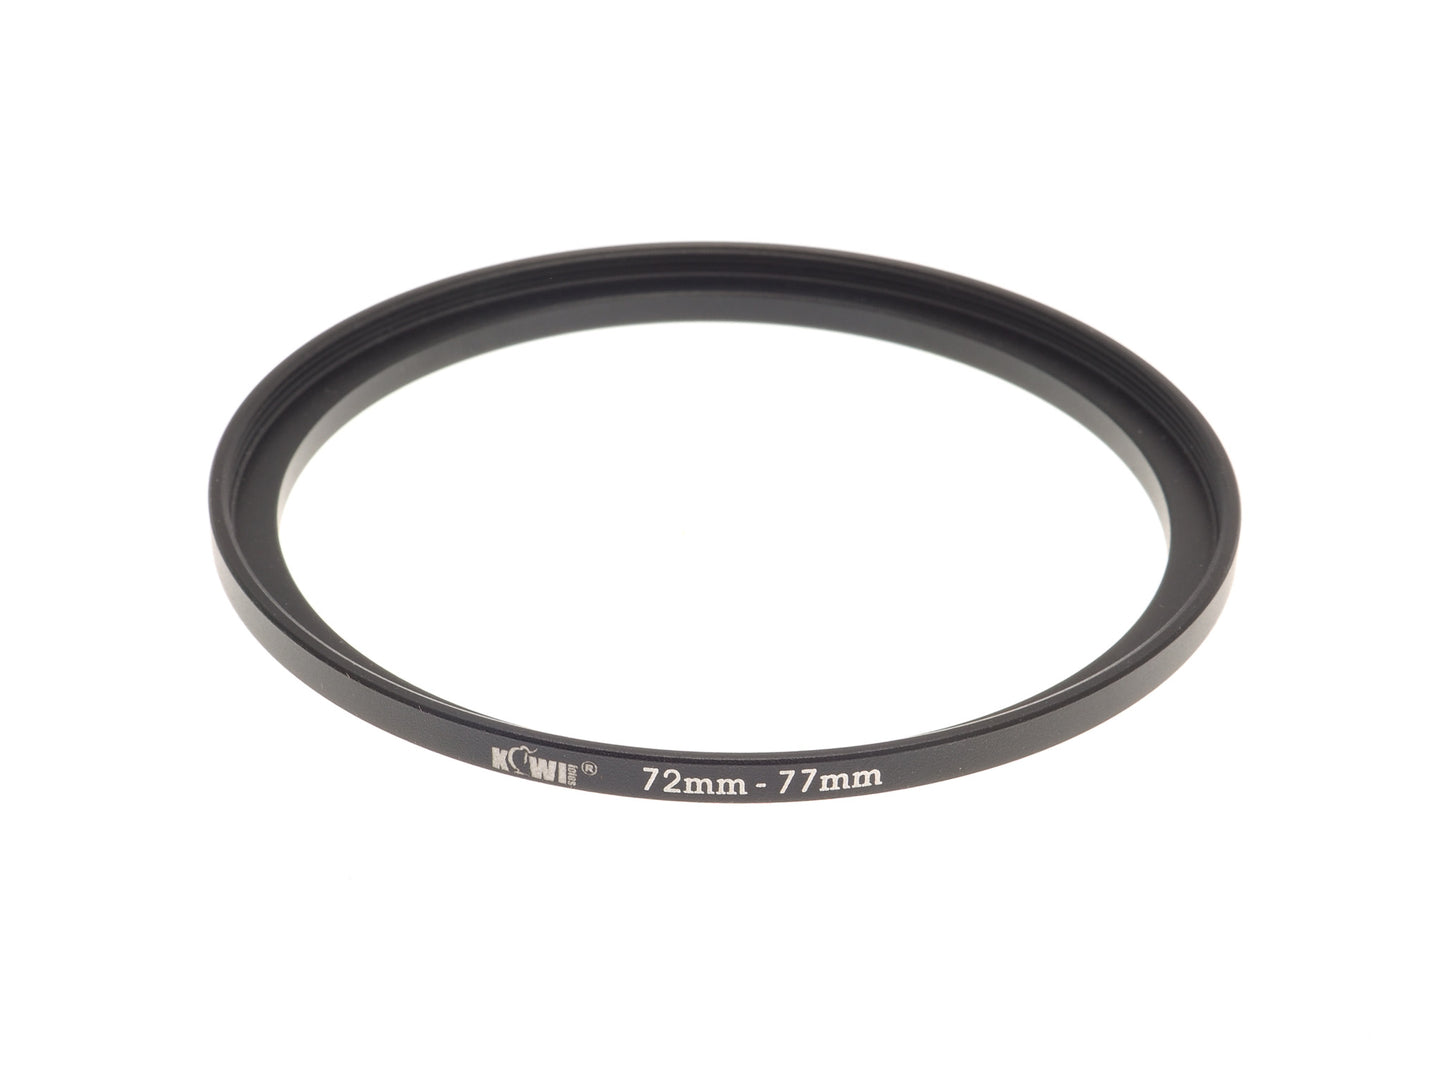 Kiwi Step-Up Ring 72mm-77mm - Accessory